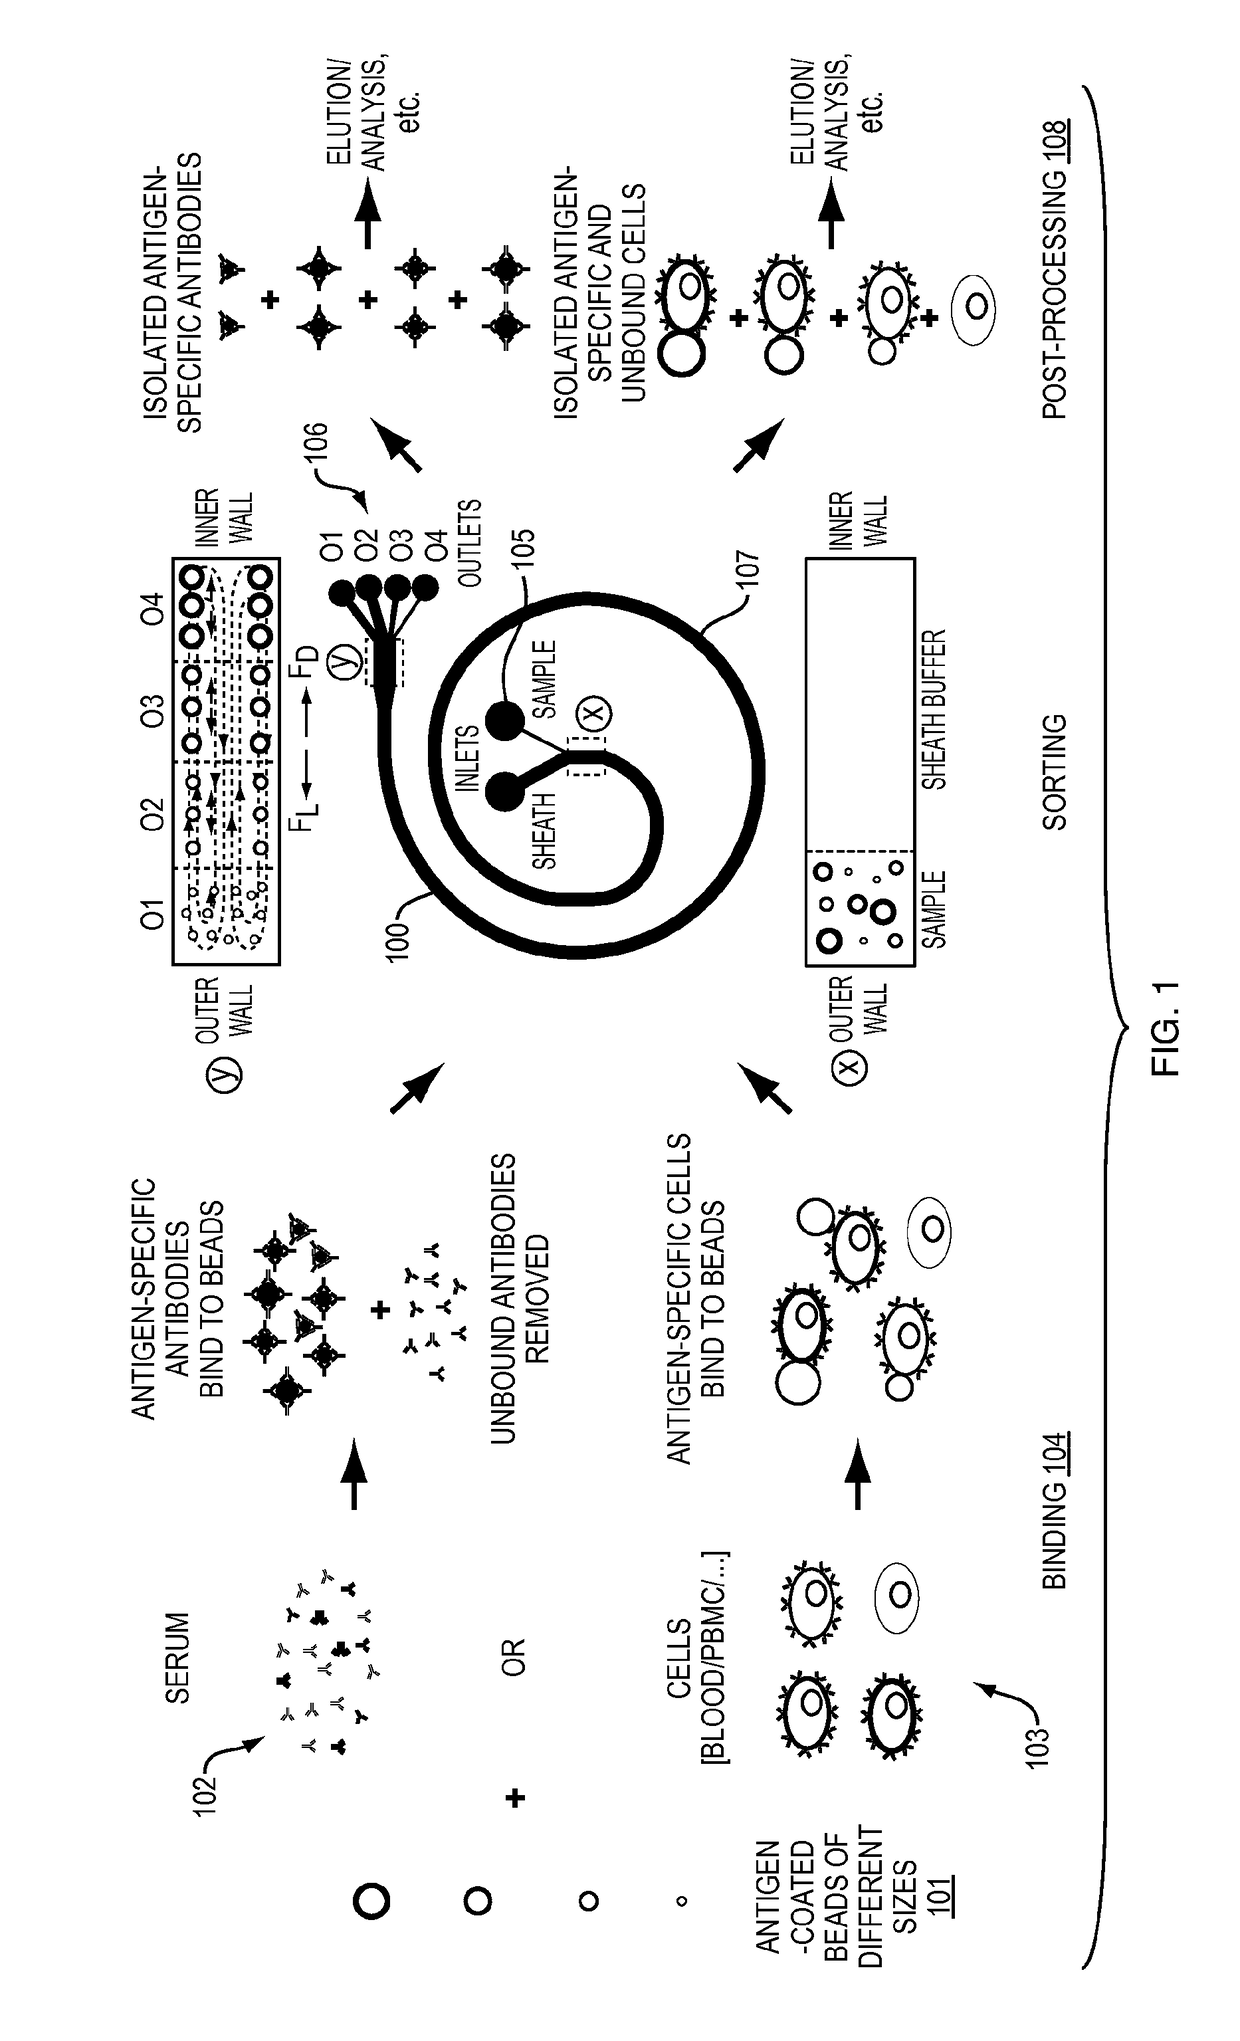 System and method for multiplexed affinity purification of proteins and cells